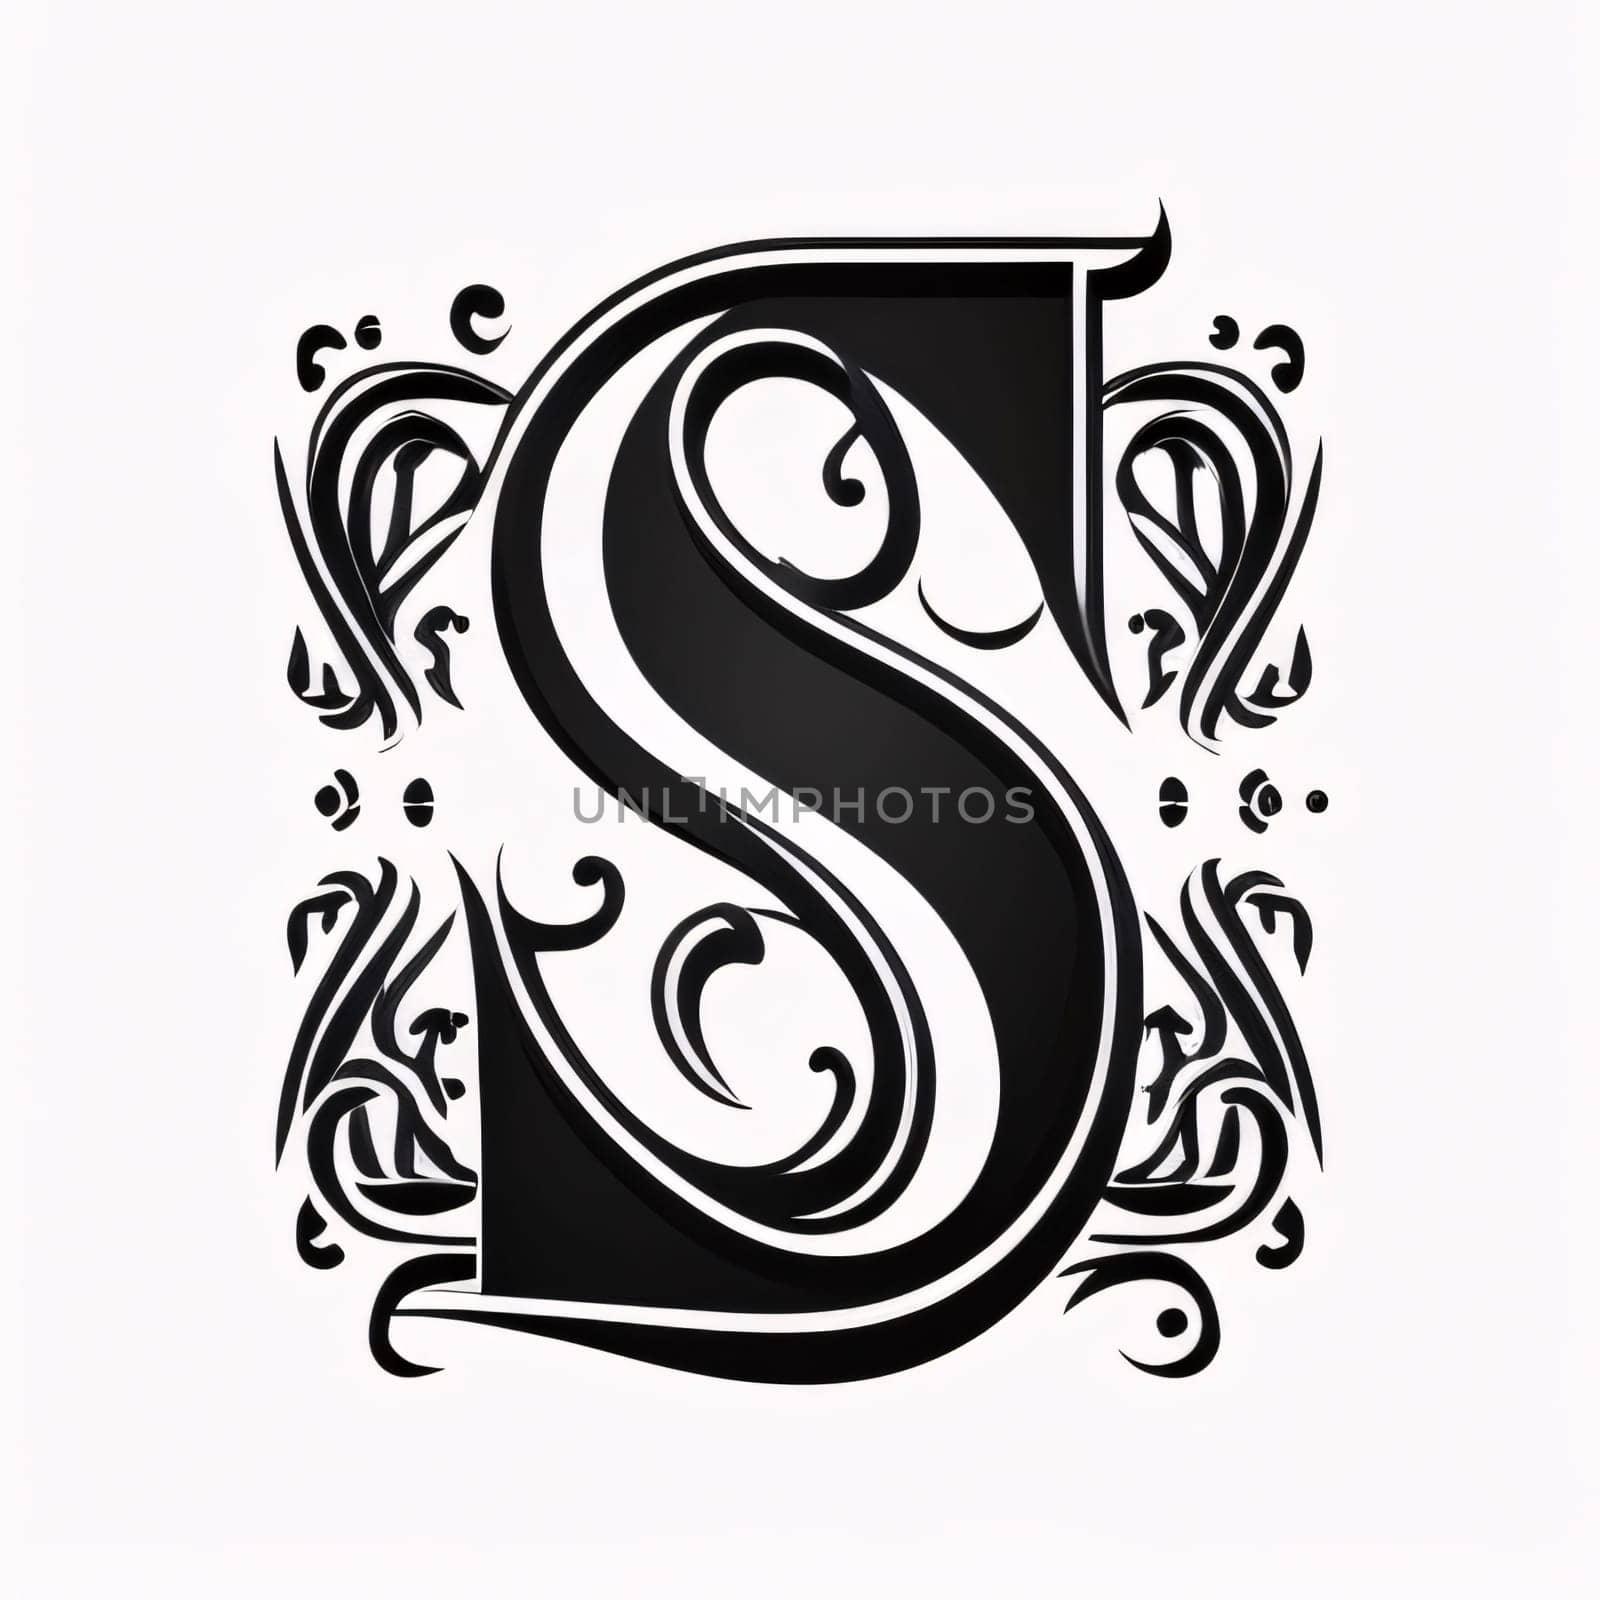 Graphic alphabet letters: Vintage Capital letter S with floral ornament in black and white.